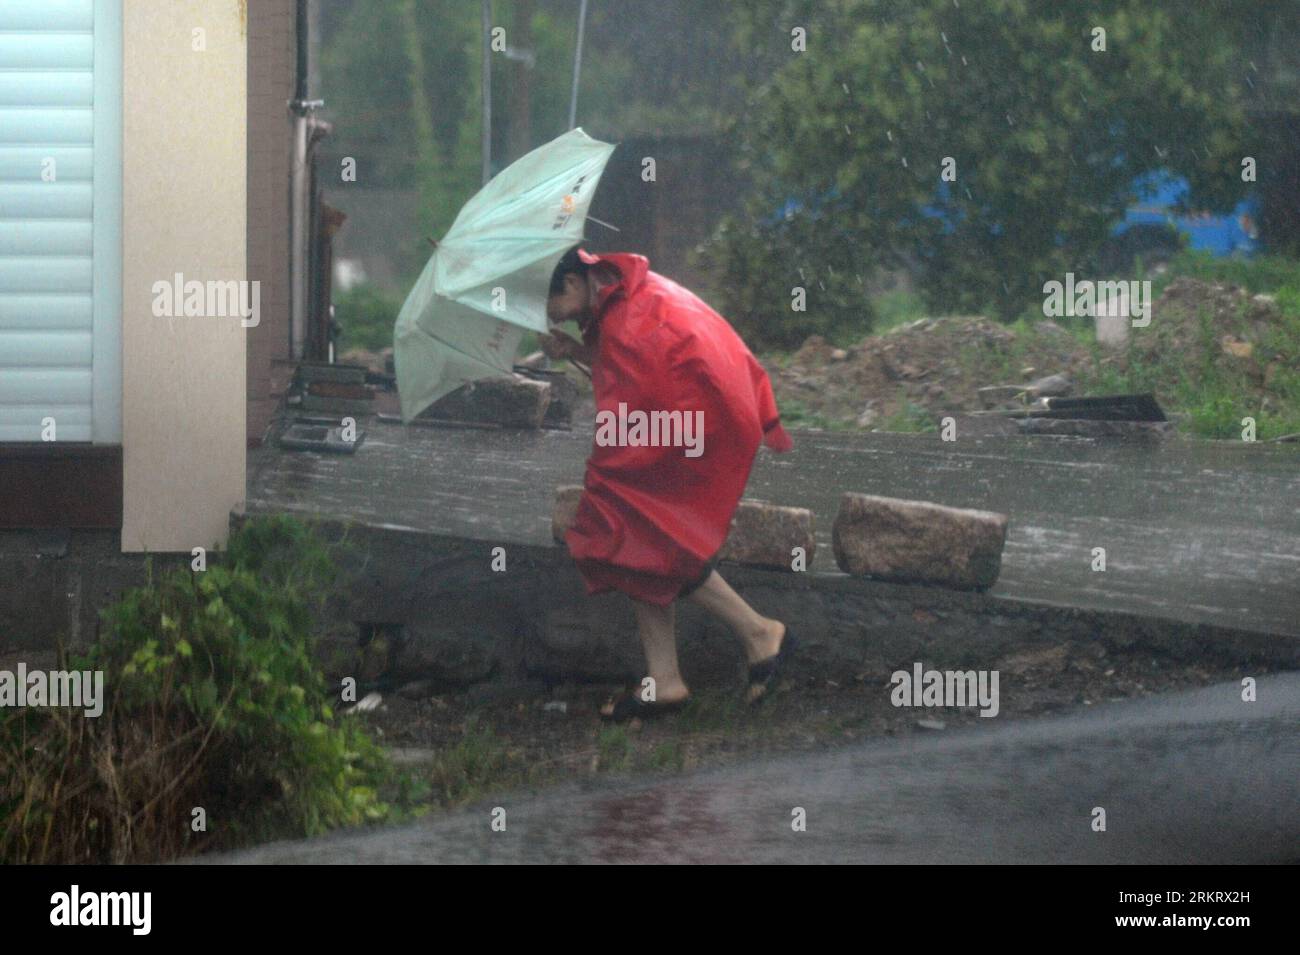 Bildnummer: 58321112  Datum: 07.08.2012  Copyright: imago/Xinhua (120807) -- XIANGSHAN, Aug. 7, 2012 (Xinhua) -- A citizen holding an umbrella walks against the gale in Shipu Town, Xiangshan County, east China s Zhejiang Province, Aug. 7, 2012. Typhoon Haikui strengthened into a severe typhoon Tuesday as it approached the coast of east China s Zhejiang Province, the provincial observatory said Tuesday. According to the latest forecast, Haikui is expected to make landfall on late Tuesday night or Wednesday morning near the Sanmenwan Gulf of Zhejiang. (Xinhua/Huang Zongzhi) (zc) CHINA-ZHEJIANG-T Stock Photo